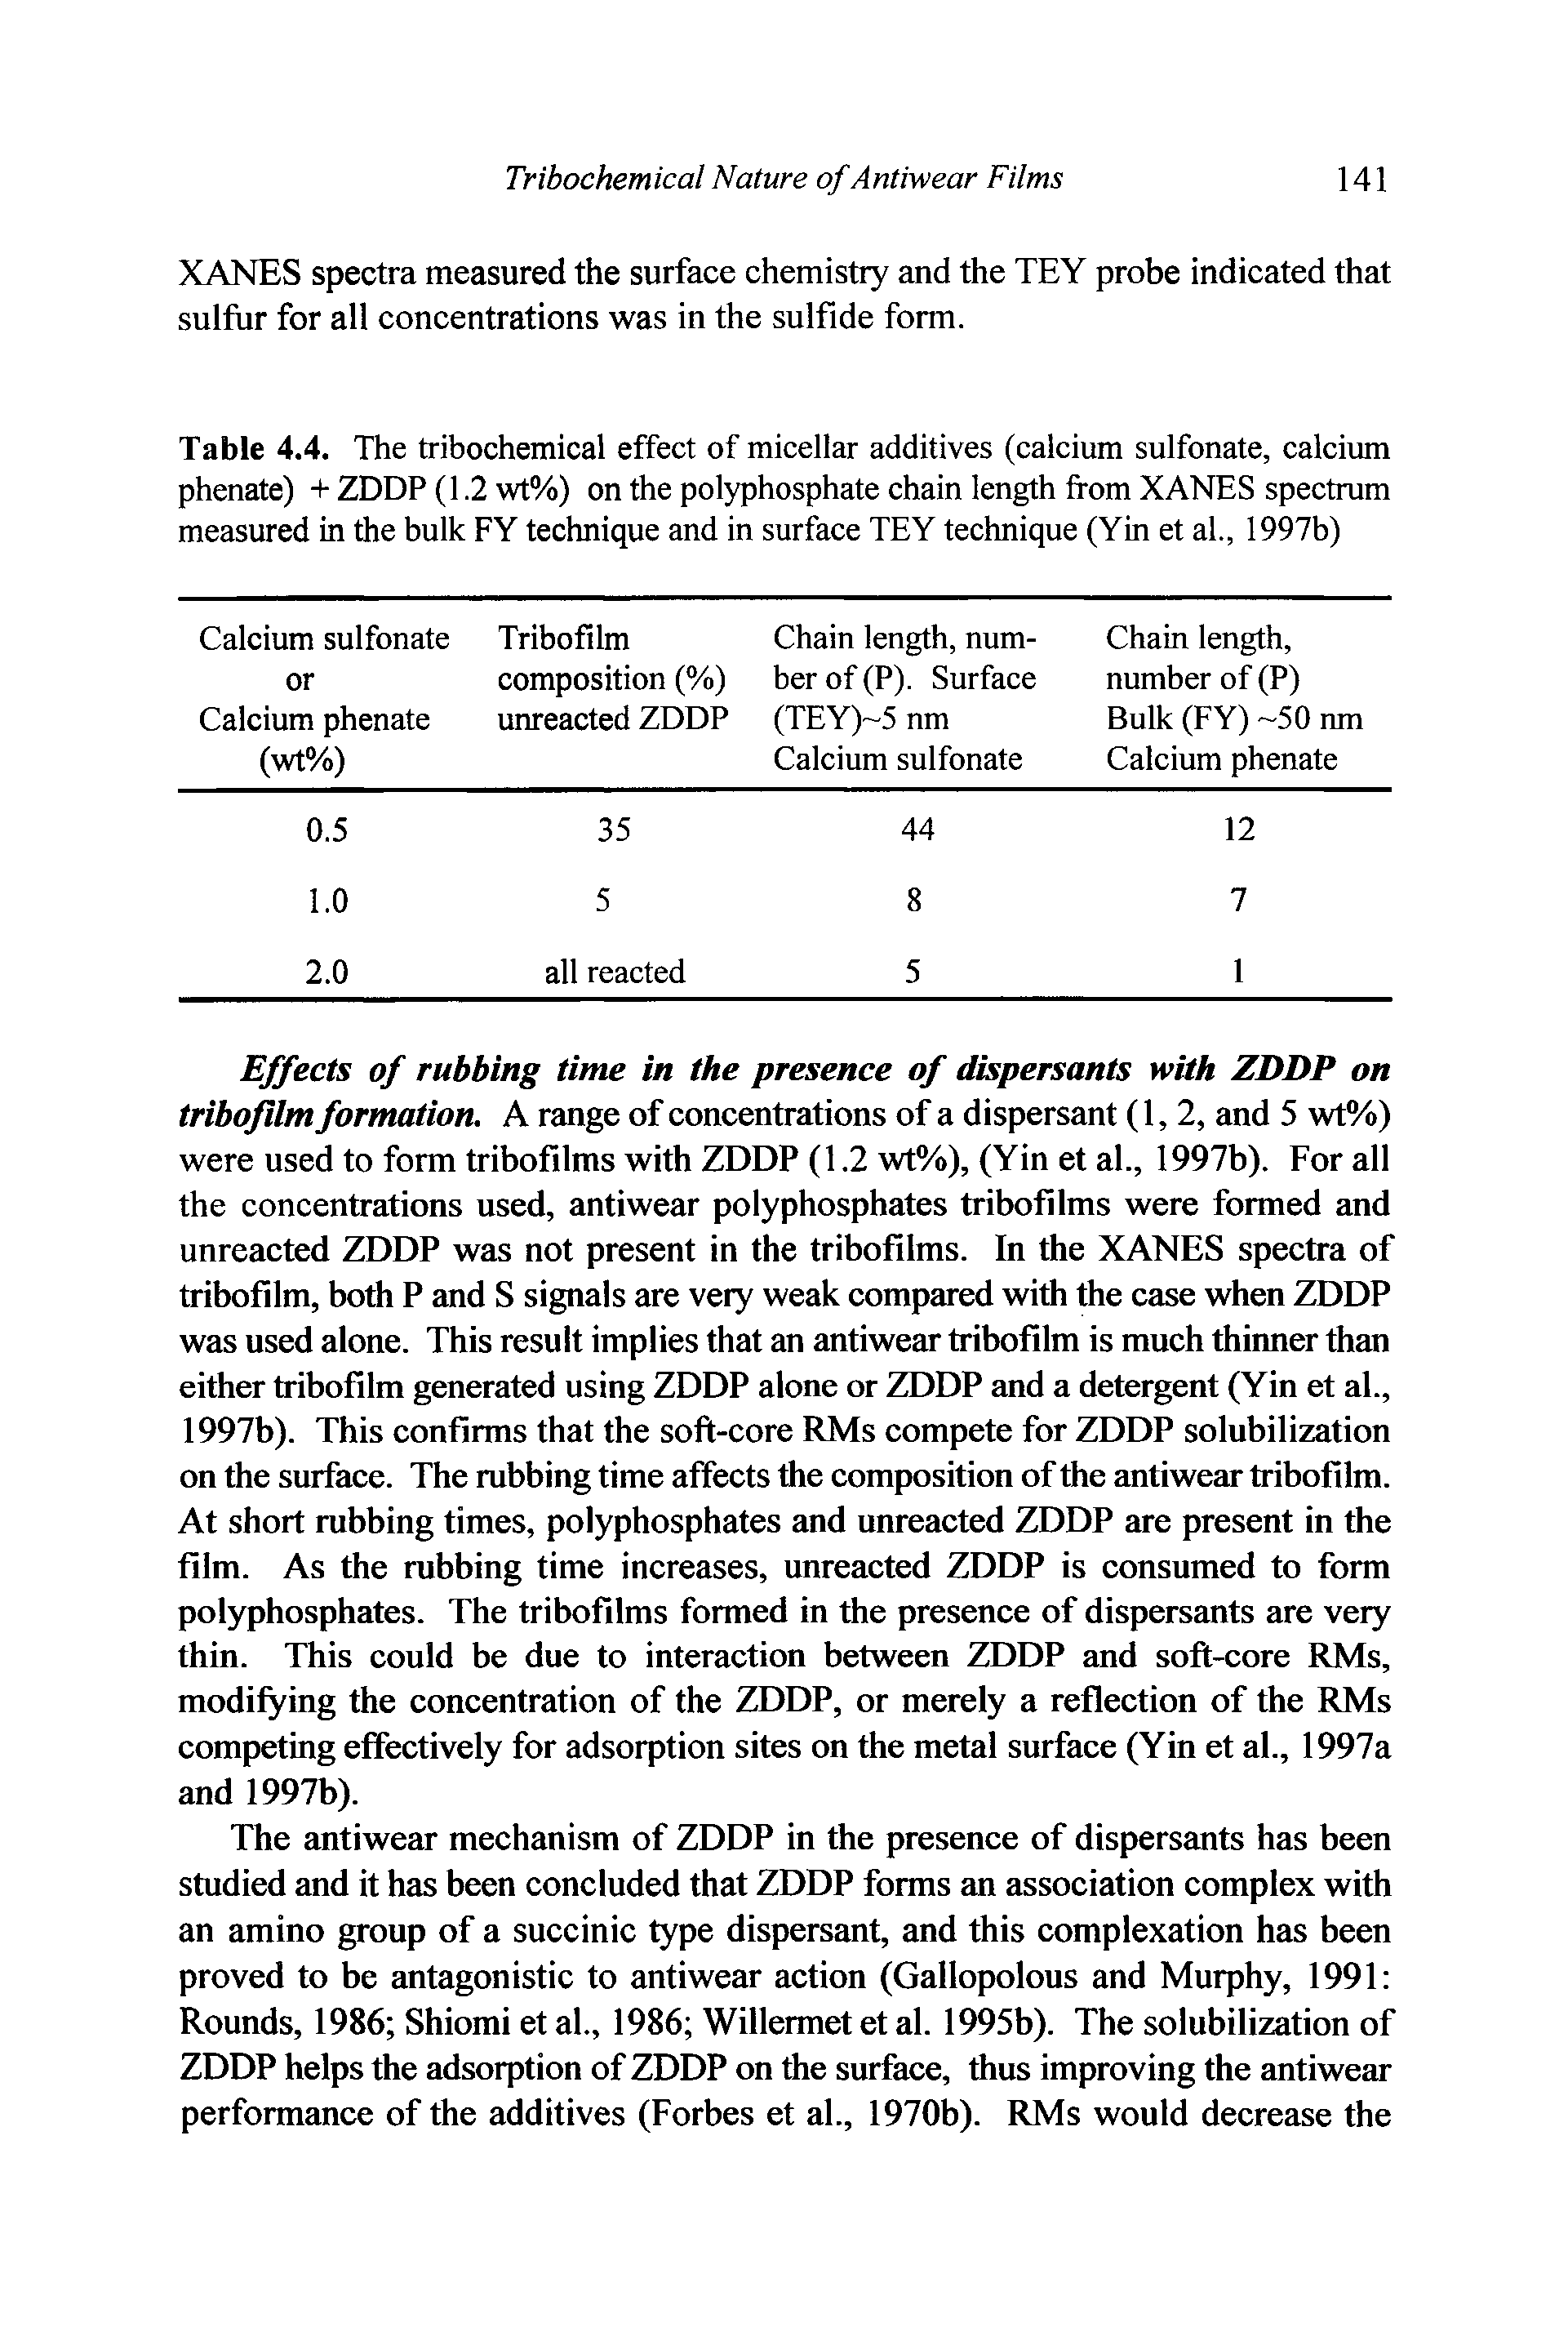 Table 4.4. The tribochemical effect of micellar additives (calcium sulfonate, calcium phenate) + ZDDP (1.2 wt%) on the polyphosphate chain length from XANES spectrum measured in the bulk FY technique and in surface TEY technique (Yin et al., 1997b)...